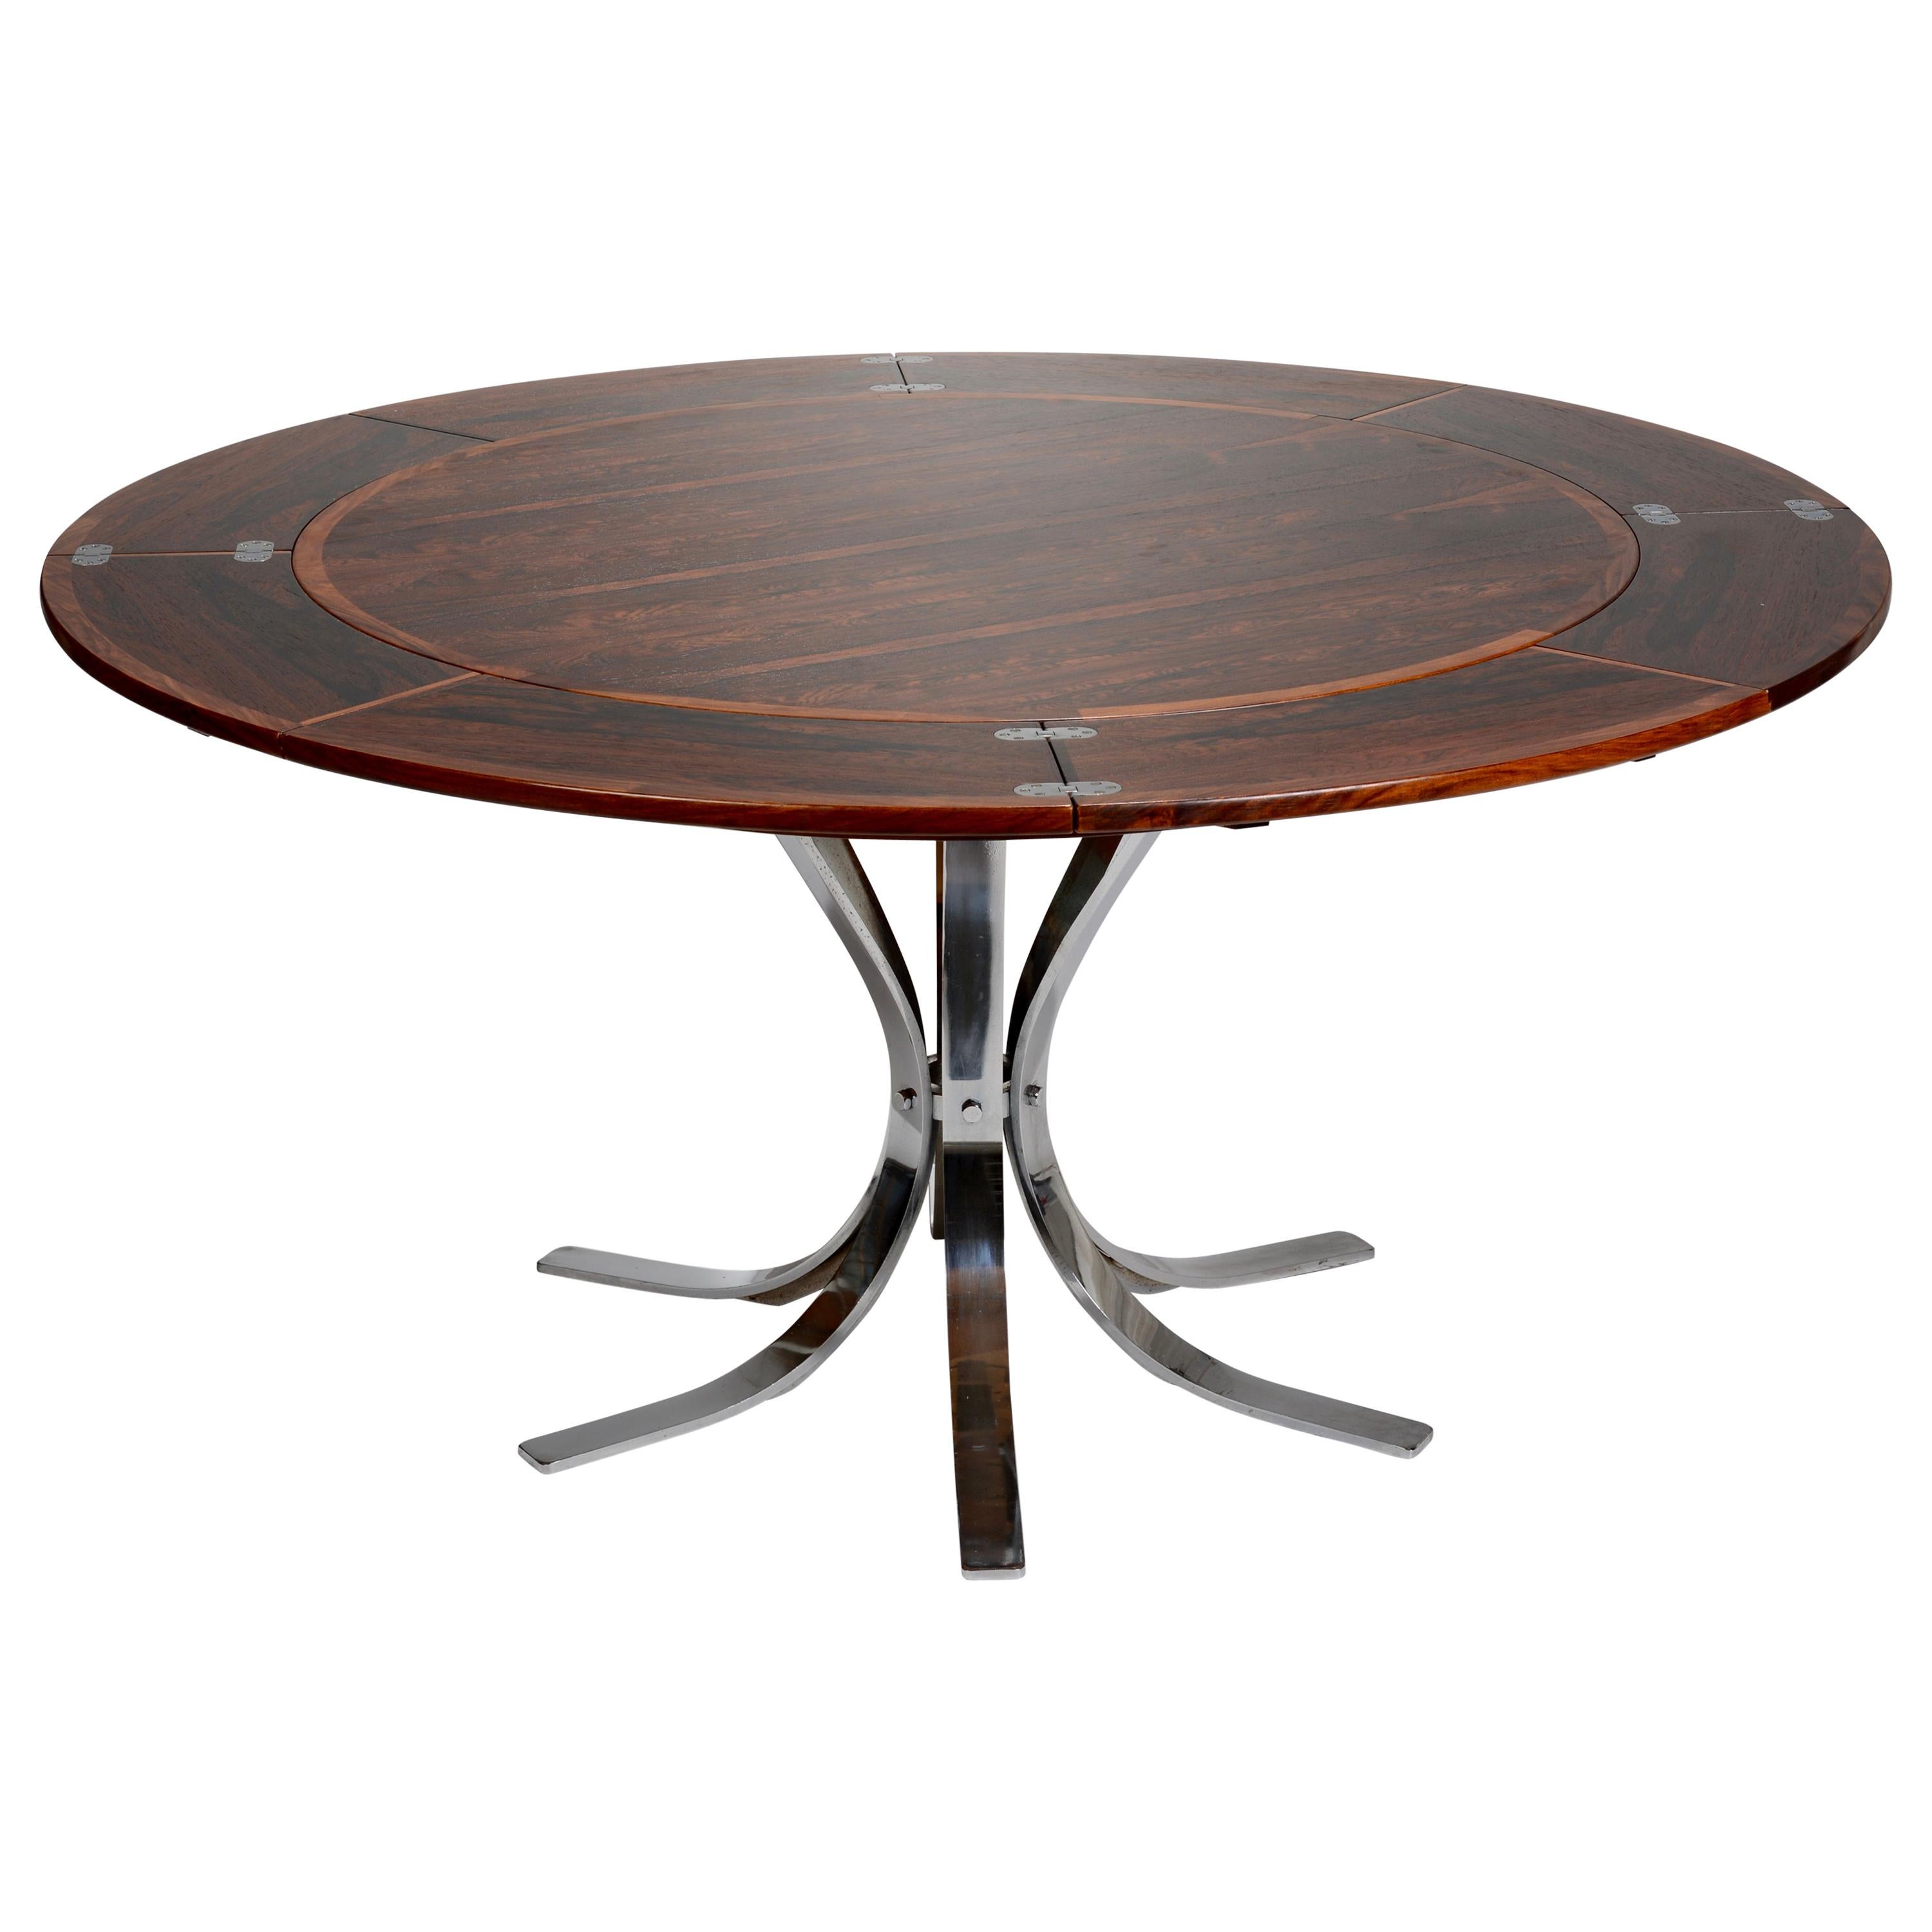 Danish Rosewood "Lotus Design" Dining Table by Dyrlund